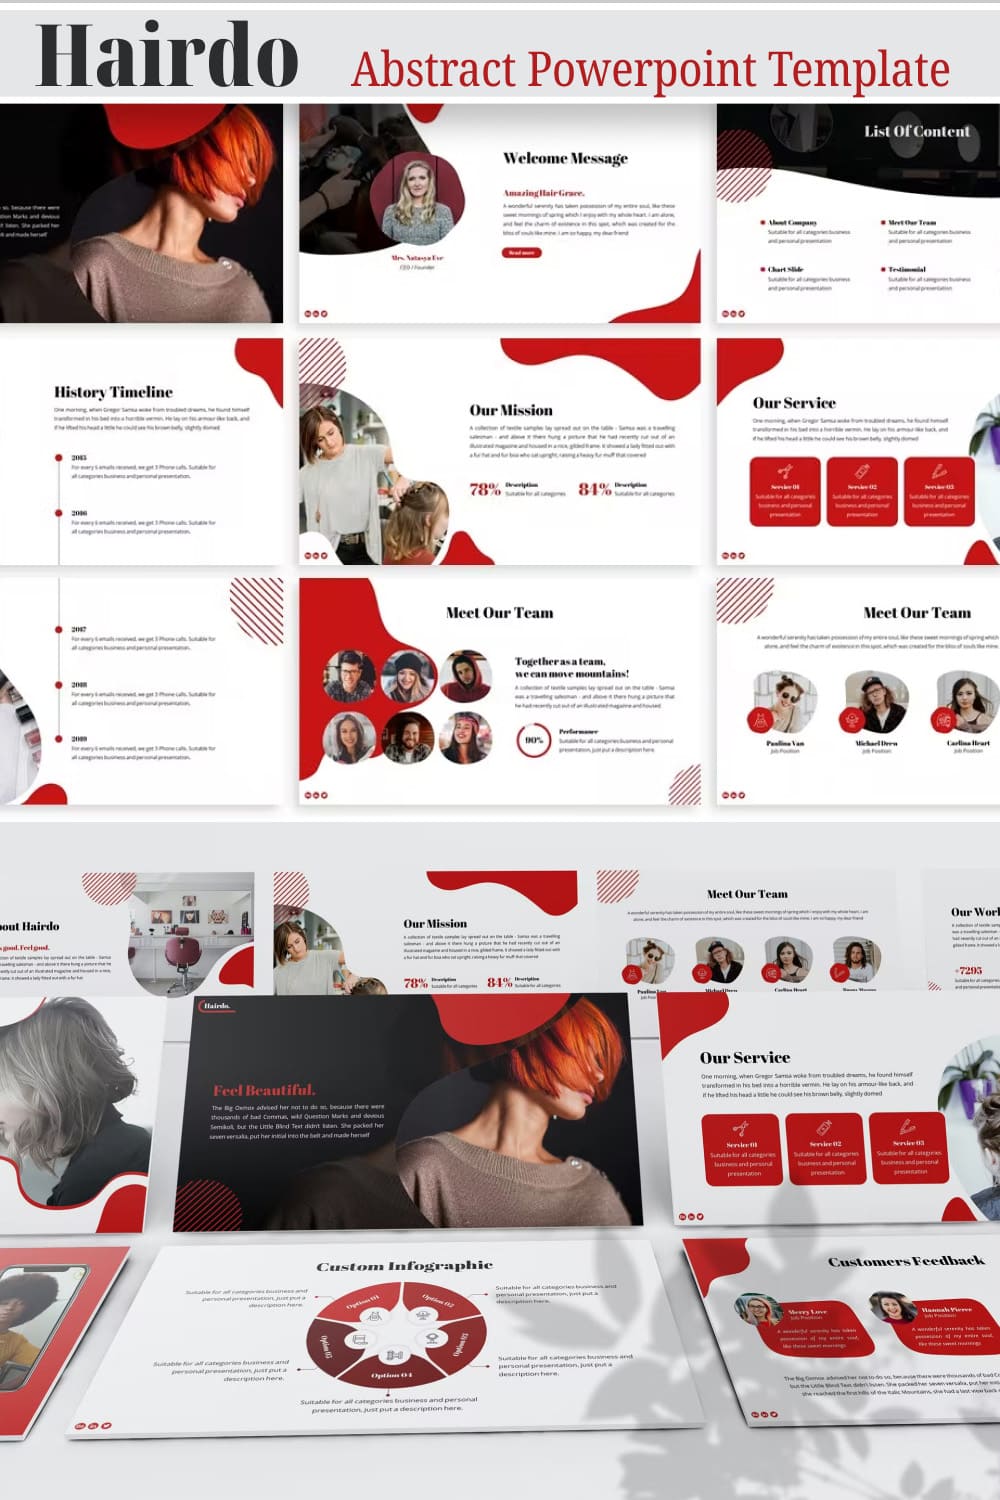 Hairdo abstract powerpoint template - pinterest image preview.